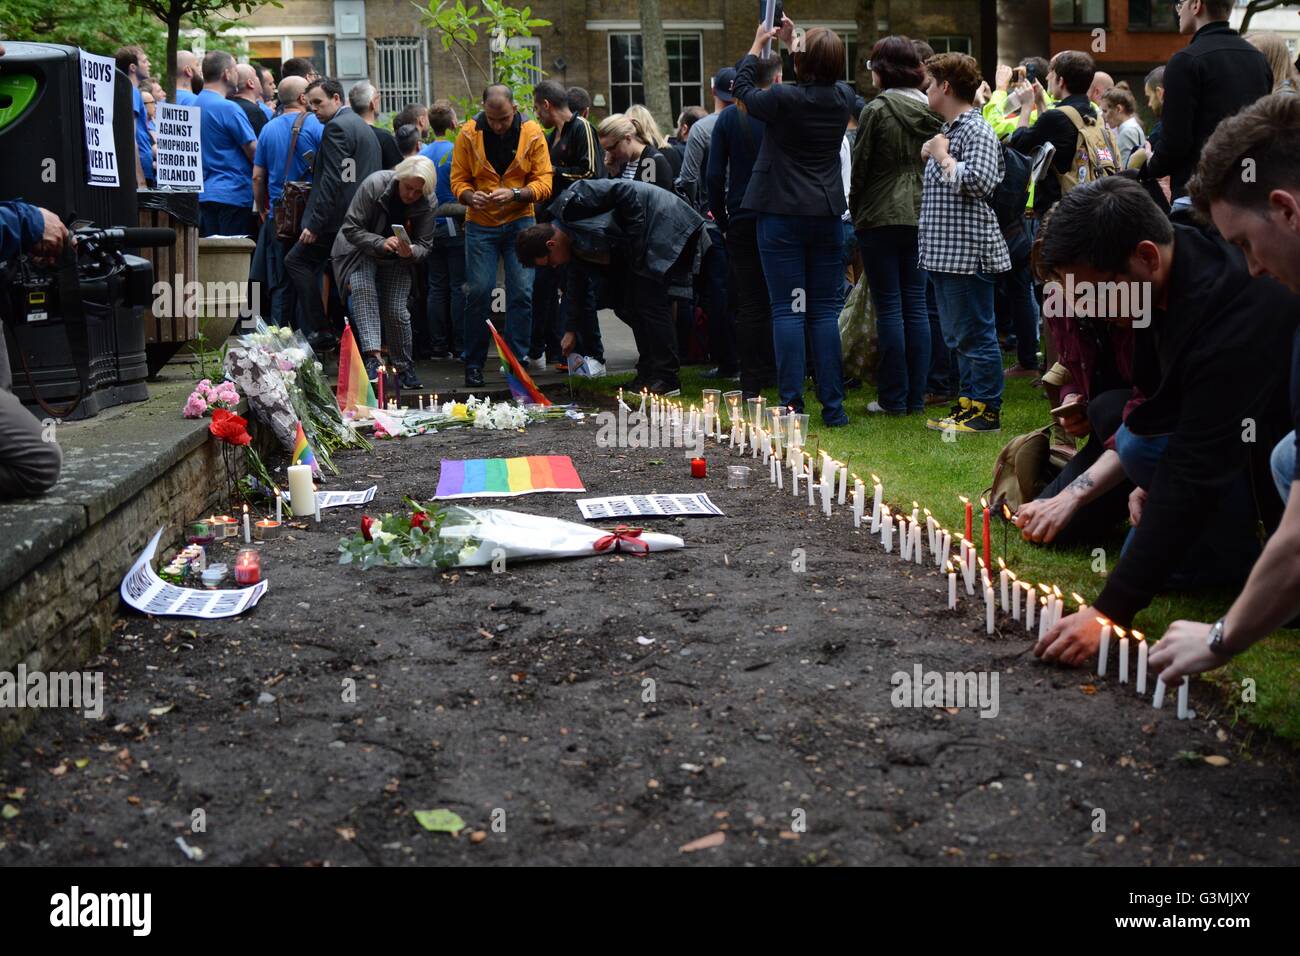 London, UK. June 13th 2016. Hundreds arrive to the churchyard to pay respects to those killed. Credit: Marc Ward/Alamy Live News Stock Photo